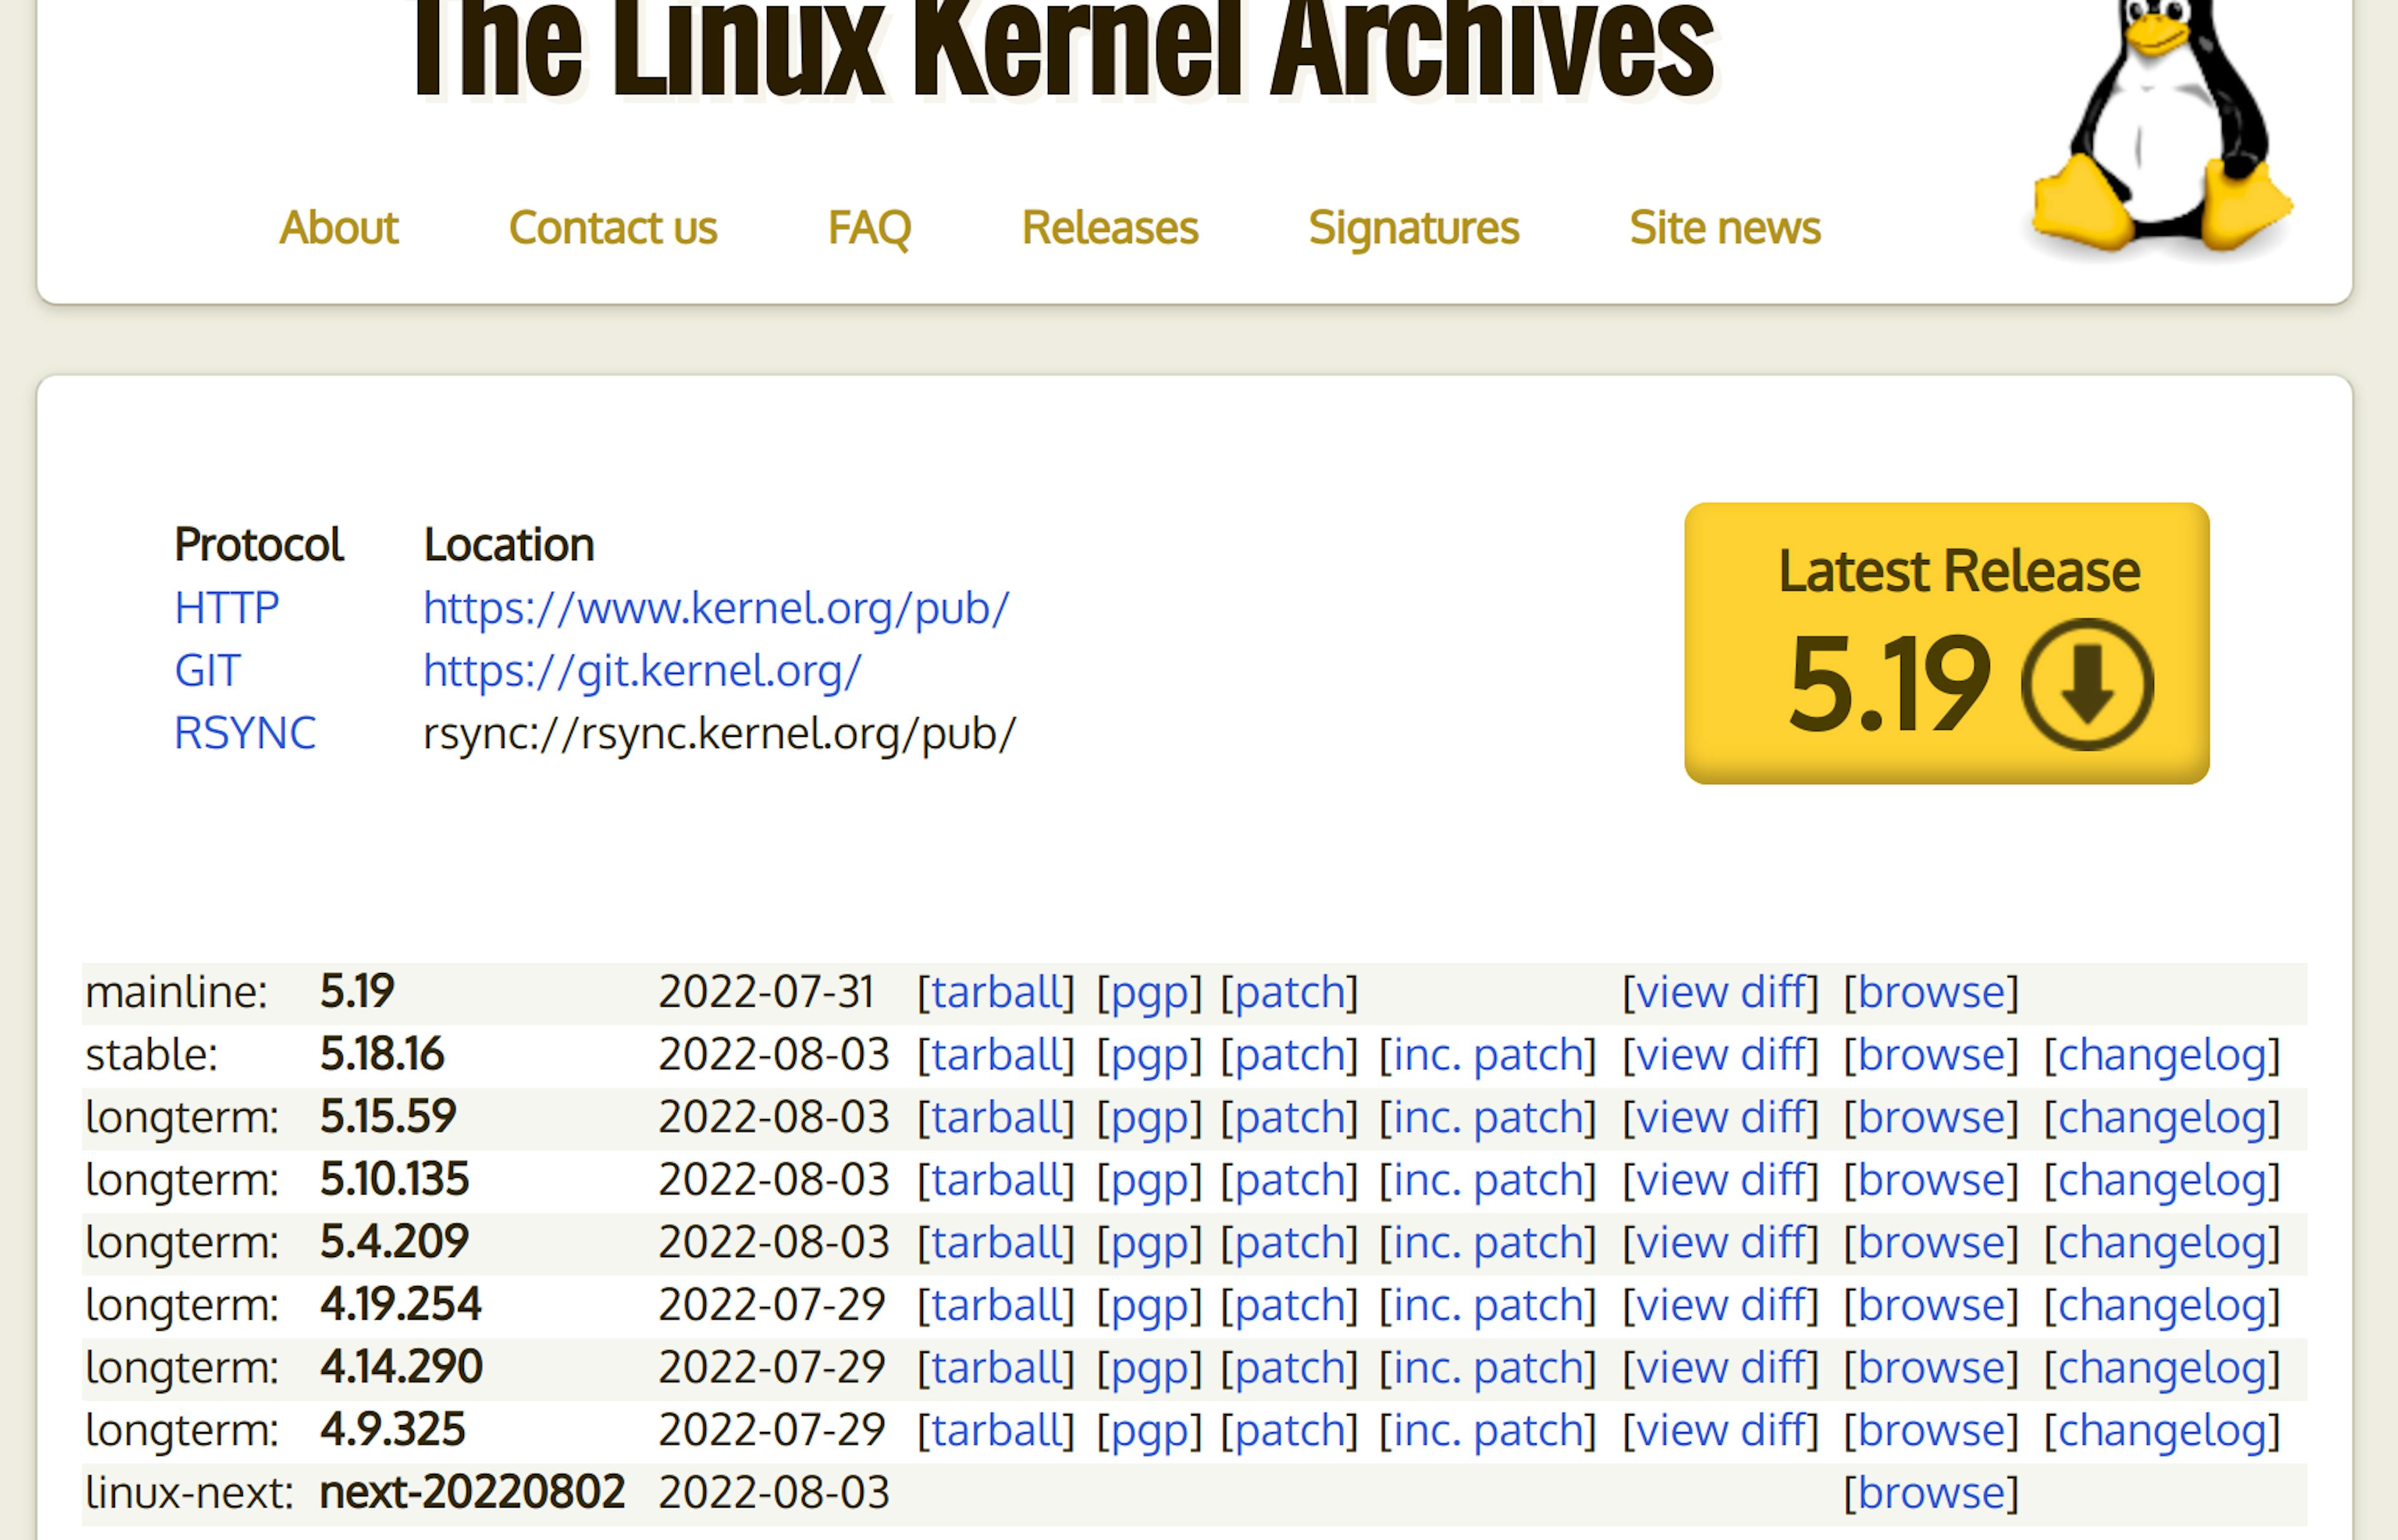 The kernel.org home page